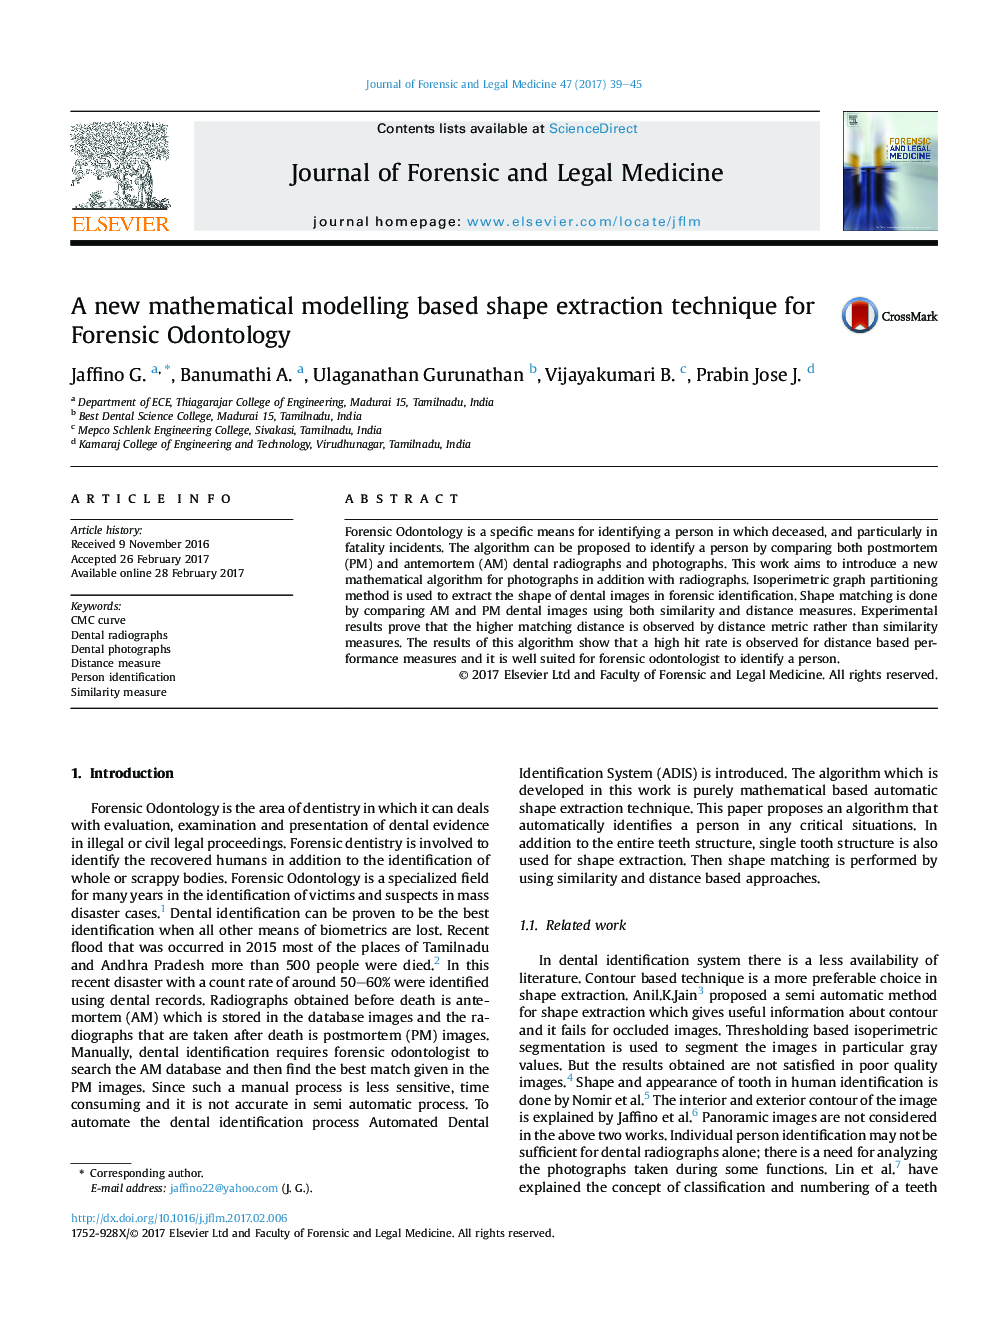 A new mathematical modelling based shape extraction technique for Forensic Odontology